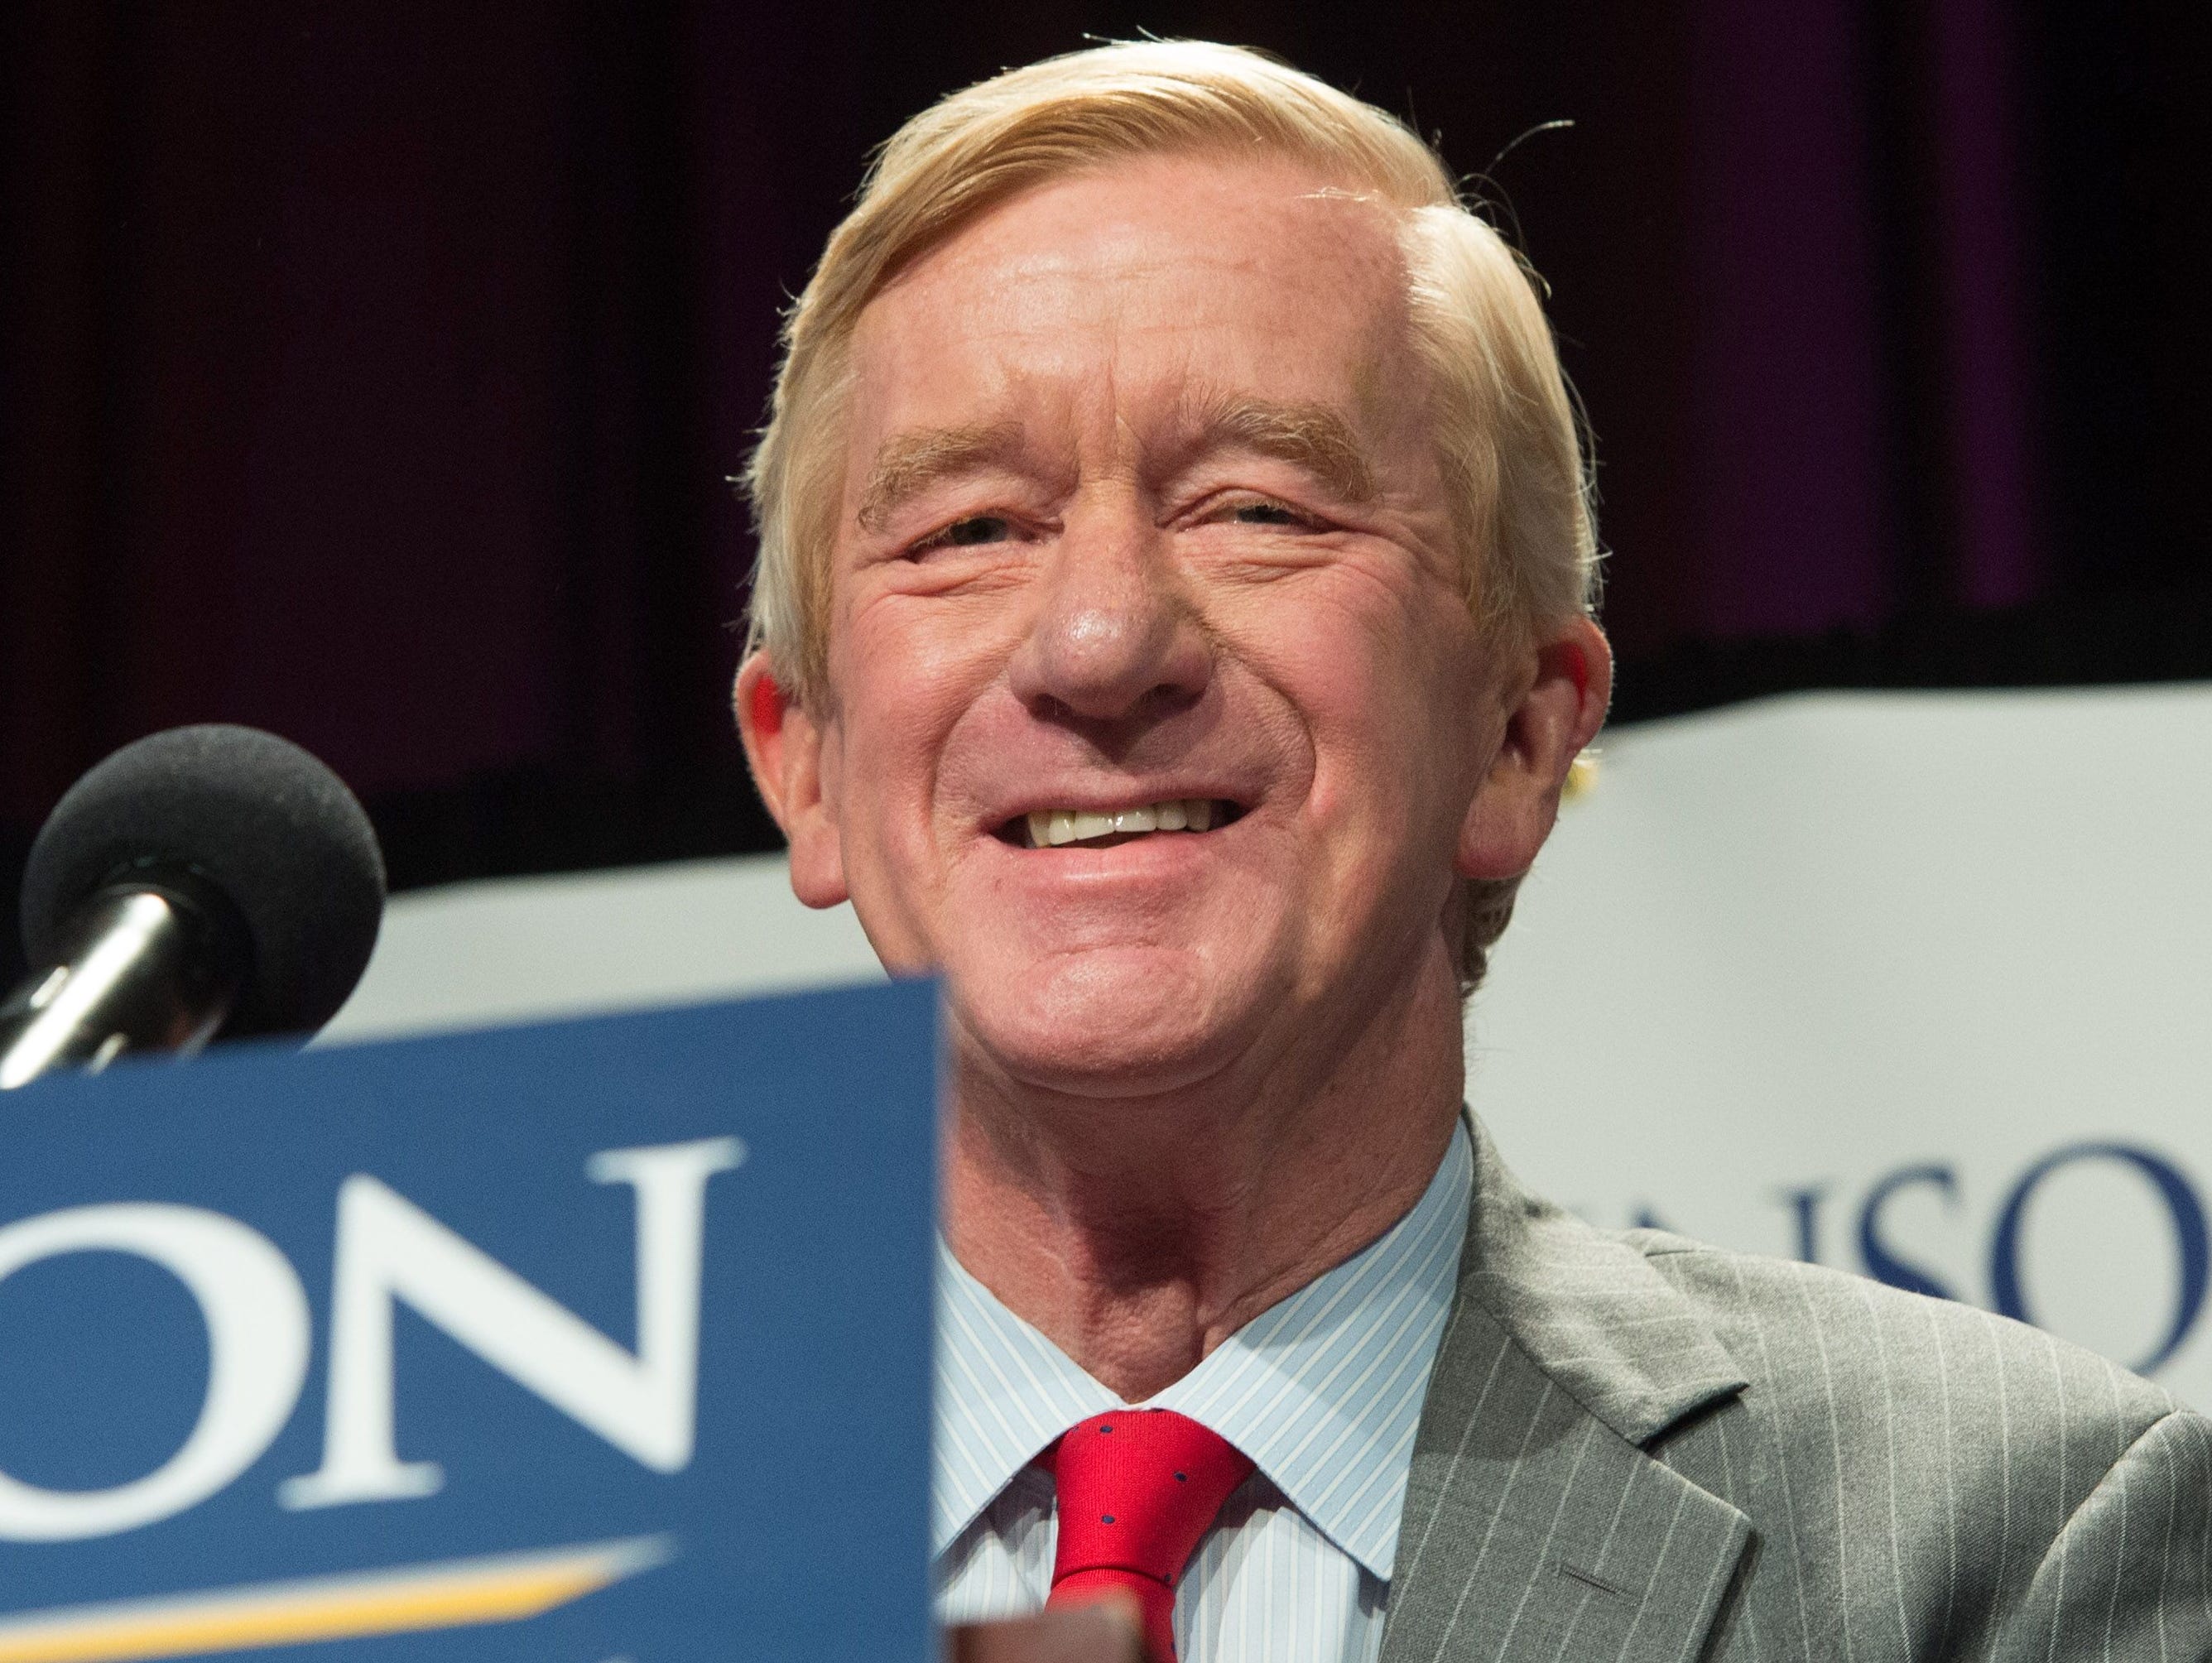 Libertarian vice-presidential candidate William Weld speaks at a rally Sept. 10, 2016 in New York